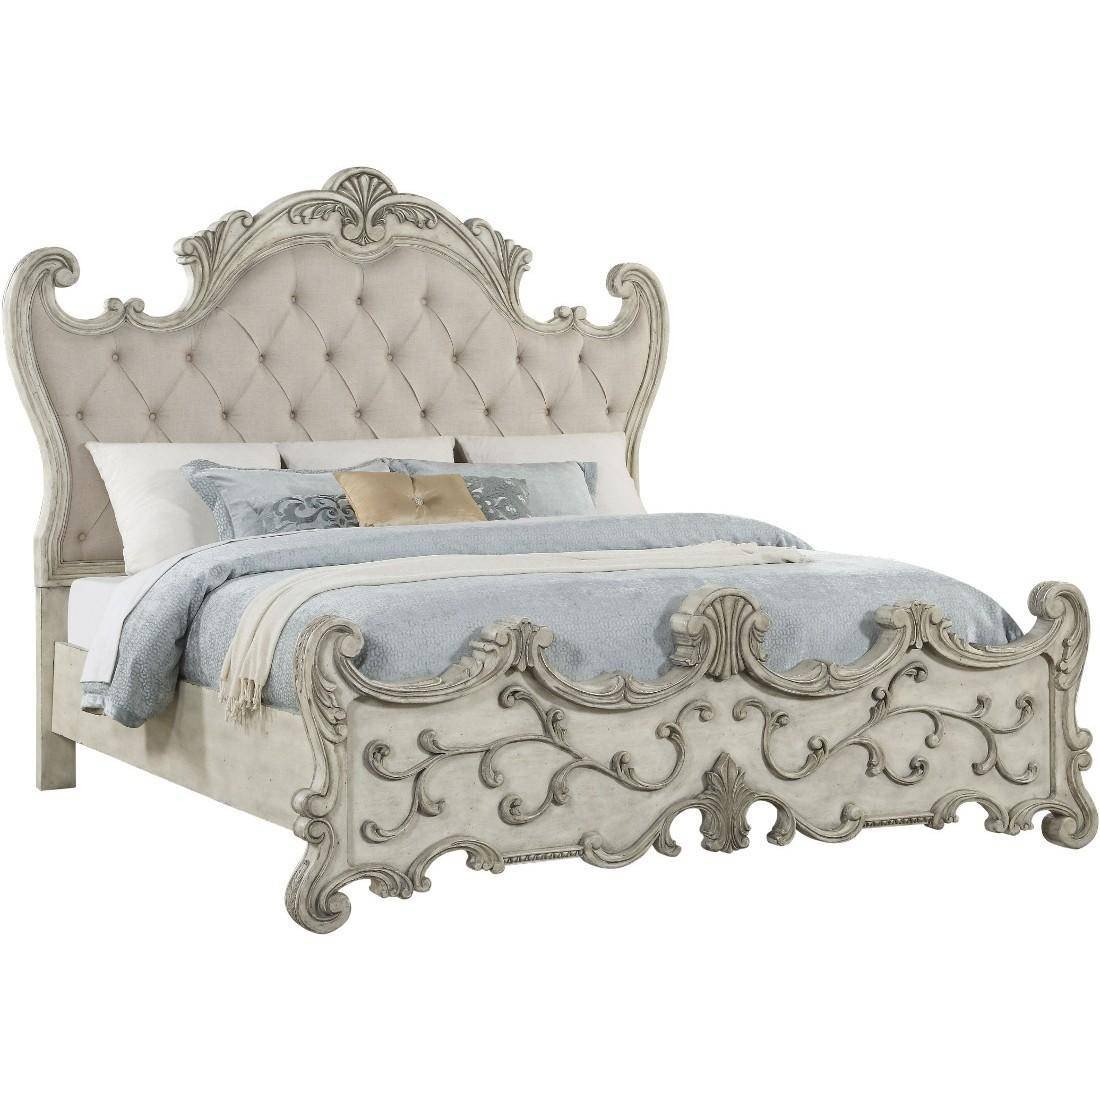 King Bedroom Set for Sale Lovely Luxury King Bedroom Set 5p W Chest Antique White Fabric